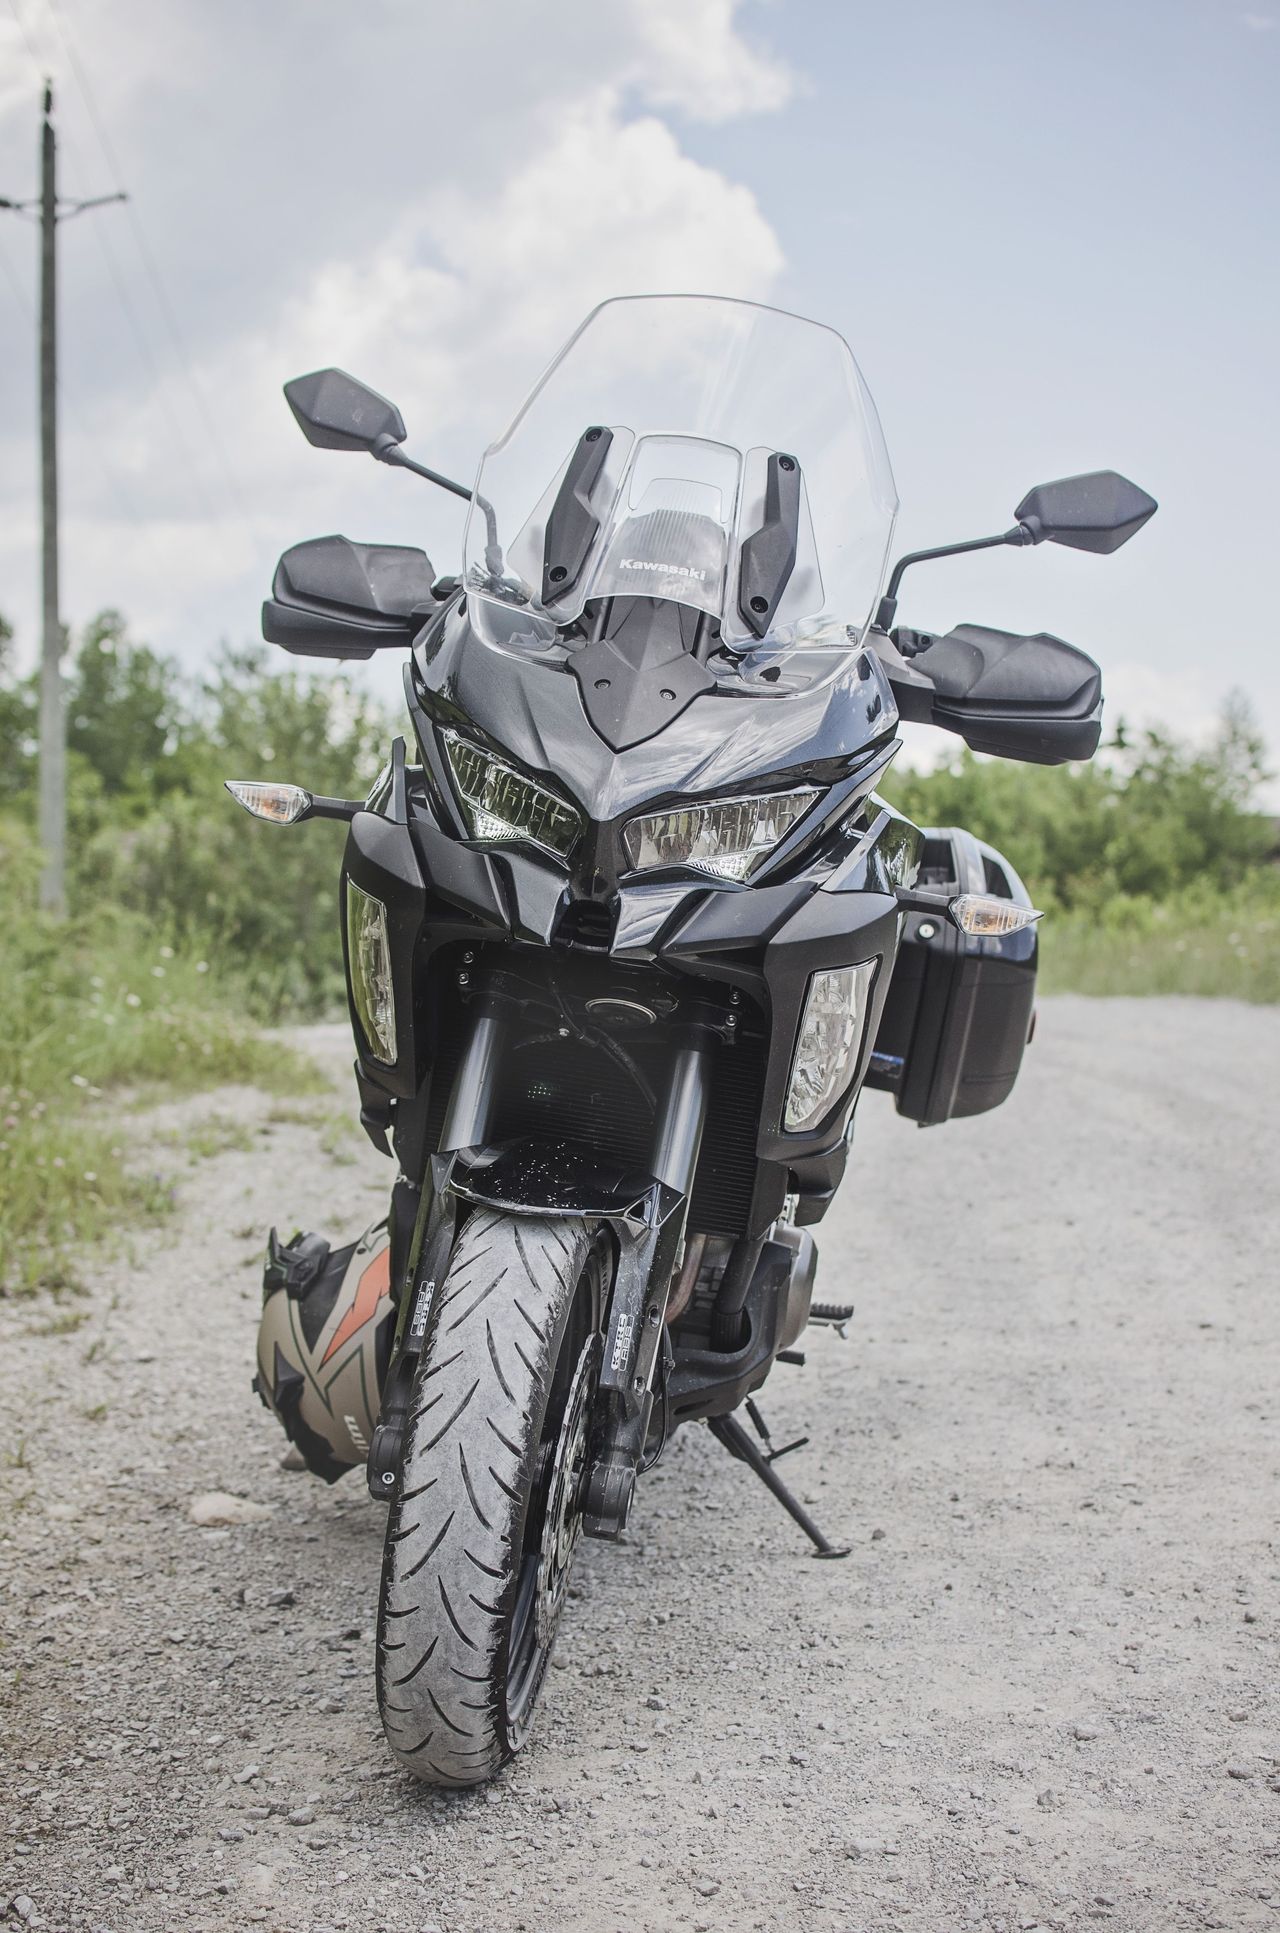 The Versys 1000 shares the same compact double headlight look of most of the Kawasaki street models